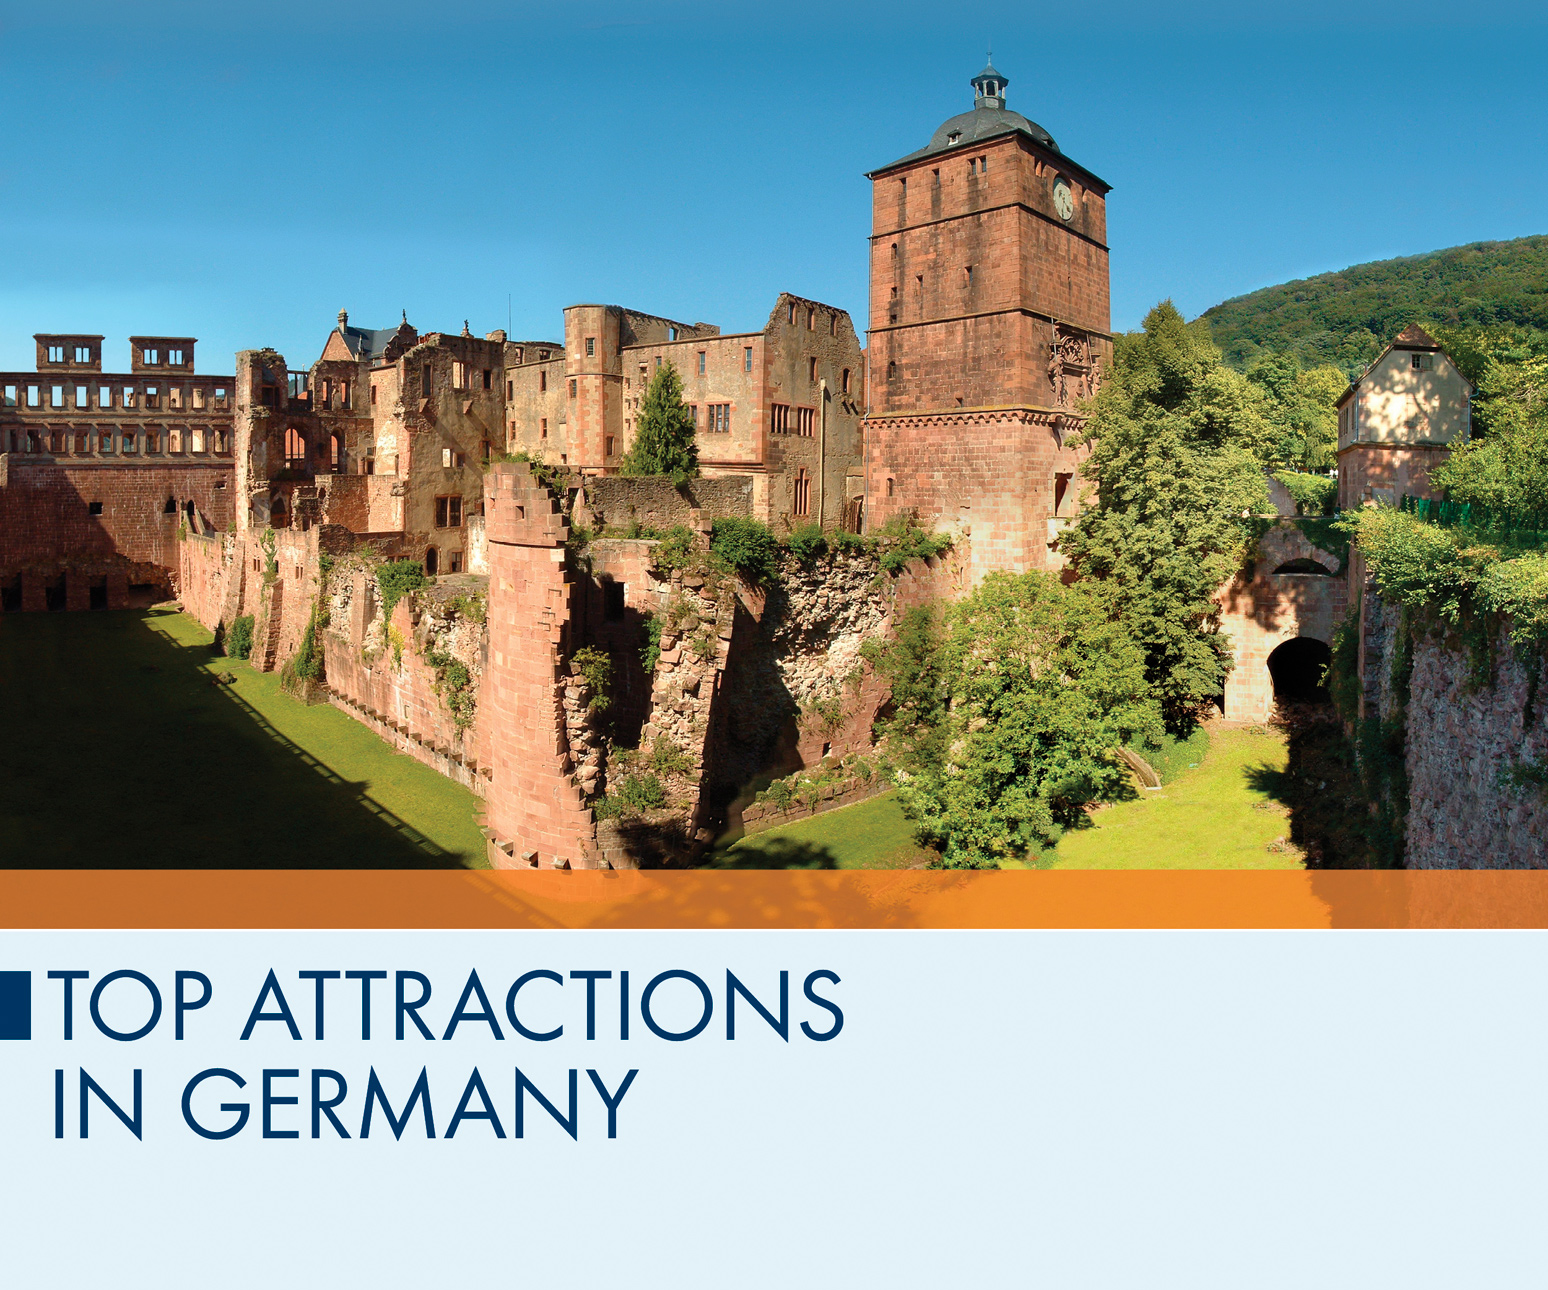 Top Attractions in Germany